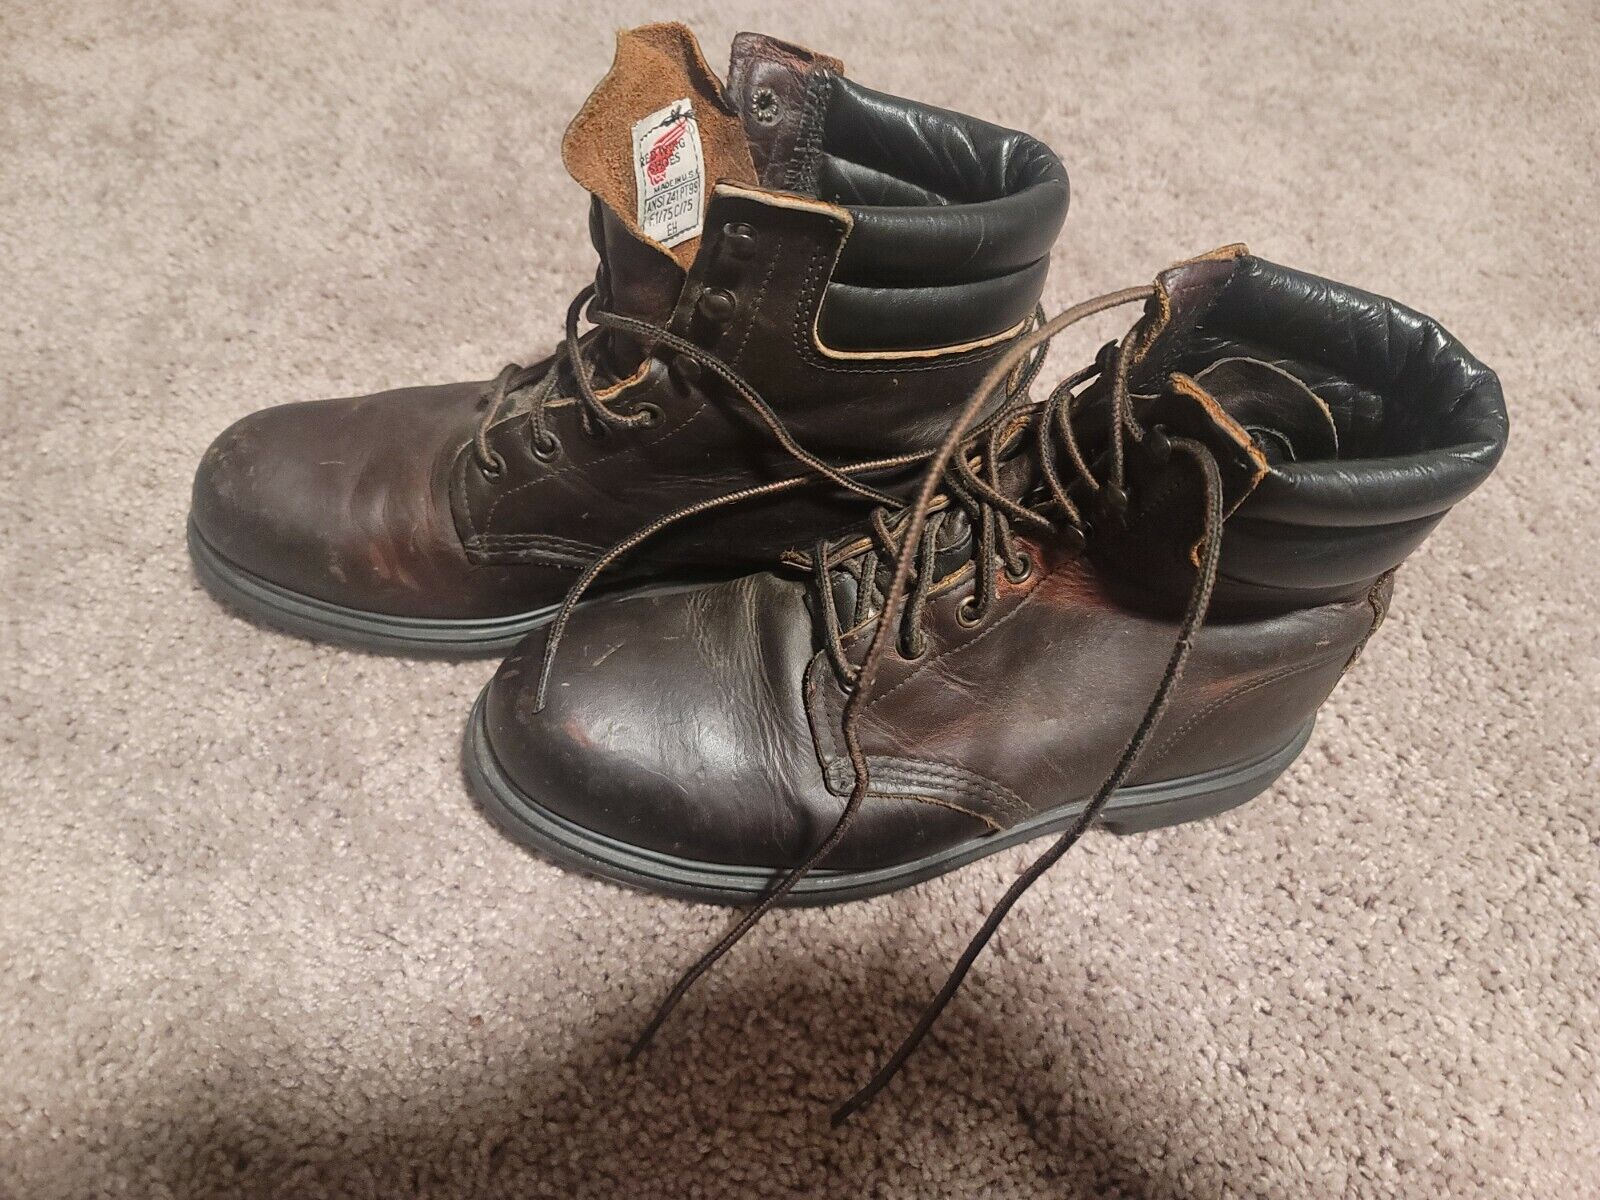 Red Wing ANSI Z41 PT99 FI/75 C/75 Brown Steel Toe Logger Work Boots zise 10